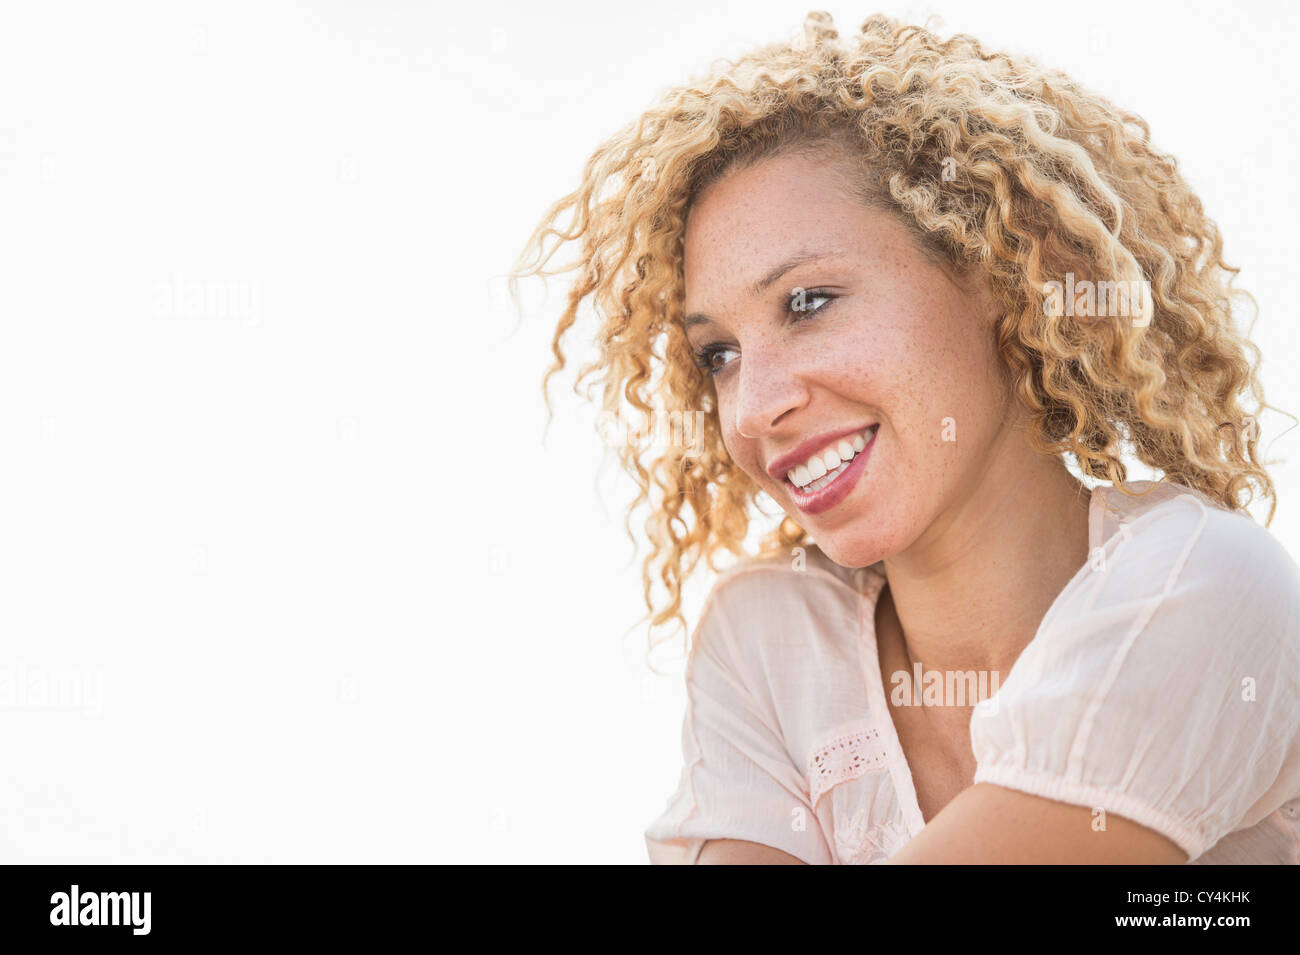 USA, New Jersey, Jersey City, Portrait of smiling young woman Banque D'Images